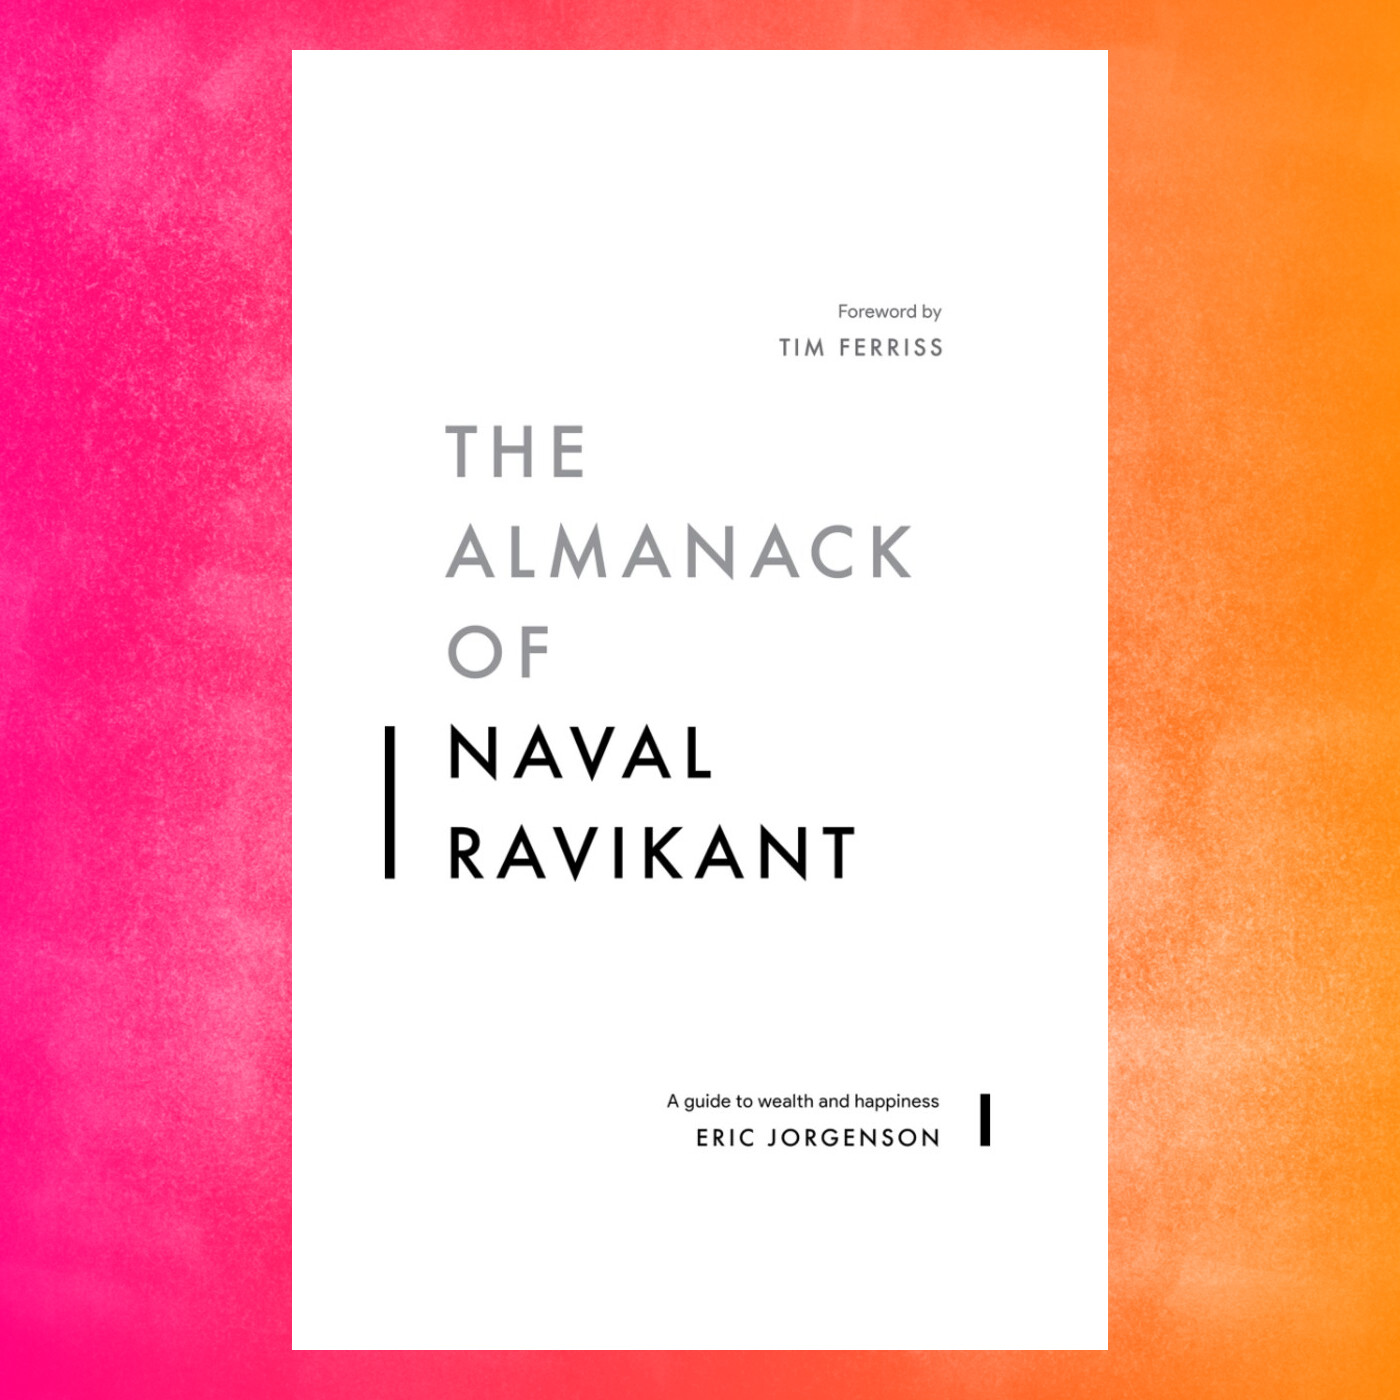 The Almanack of Naval Ravikant Book Summary by Eric Jorgenson